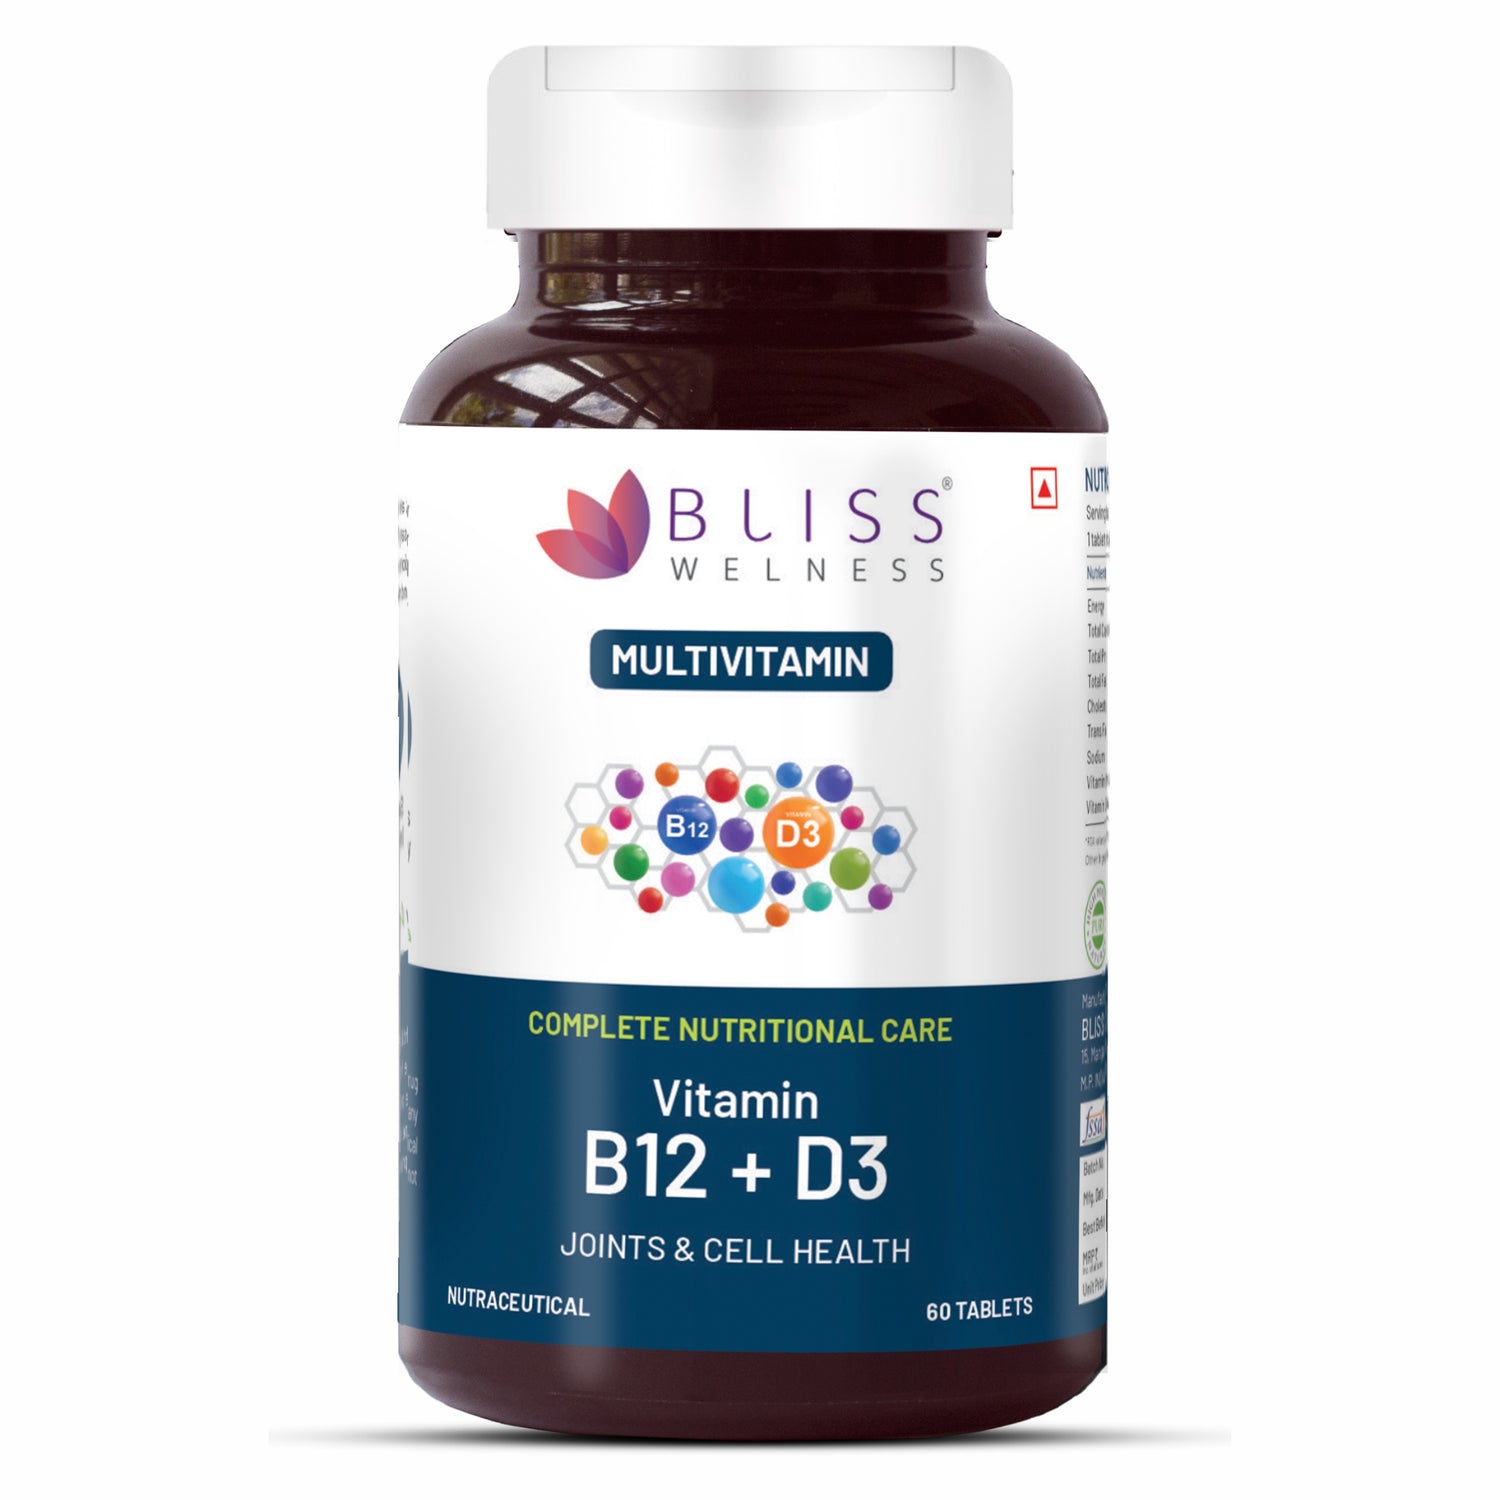 Bliss Welness VitaBliss B12+D3 Vitamin | For Bone, Immune and Cognitive Health | Complete Nutritional Care Supplement - 60 Tablets 